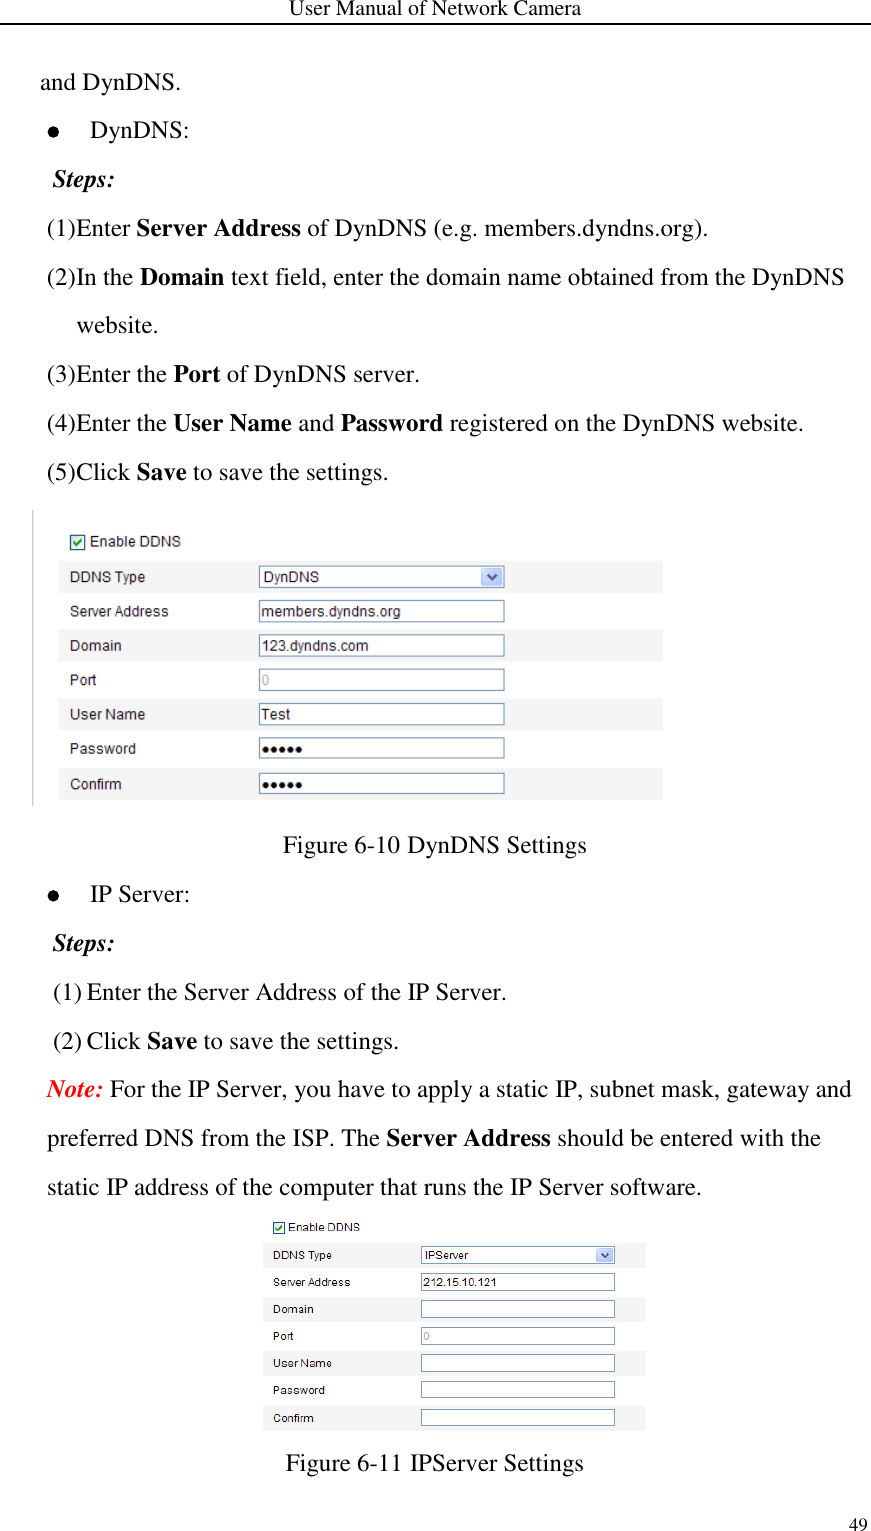 User Manual of Network Camera 49  and DynDNS.  DynDNS: Steps: (1) Enter Server Address of DynDNS (e.g. members.dyndns.org). (2) In the Domain text field, enter the domain name obtained from the DynDNS website.   (3) Enter the Port of DynDNS server. (4) Enter the User Name and Password registered on the DynDNS website. (5) Click Save to save the settings.  Figure 6-10 DynDNS Settings  IP Server: Steps: (1) Enter the Server Address of the IP Server. (2) Click Save to save the settings. Note: For the IP Server, you have to apply a static IP, subnet mask, gateway and preferred DNS from the ISP. The Server Address should be entered with the static IP address of the computer that runs the IP Server software.  Figure 6-11 IPServer Settings 